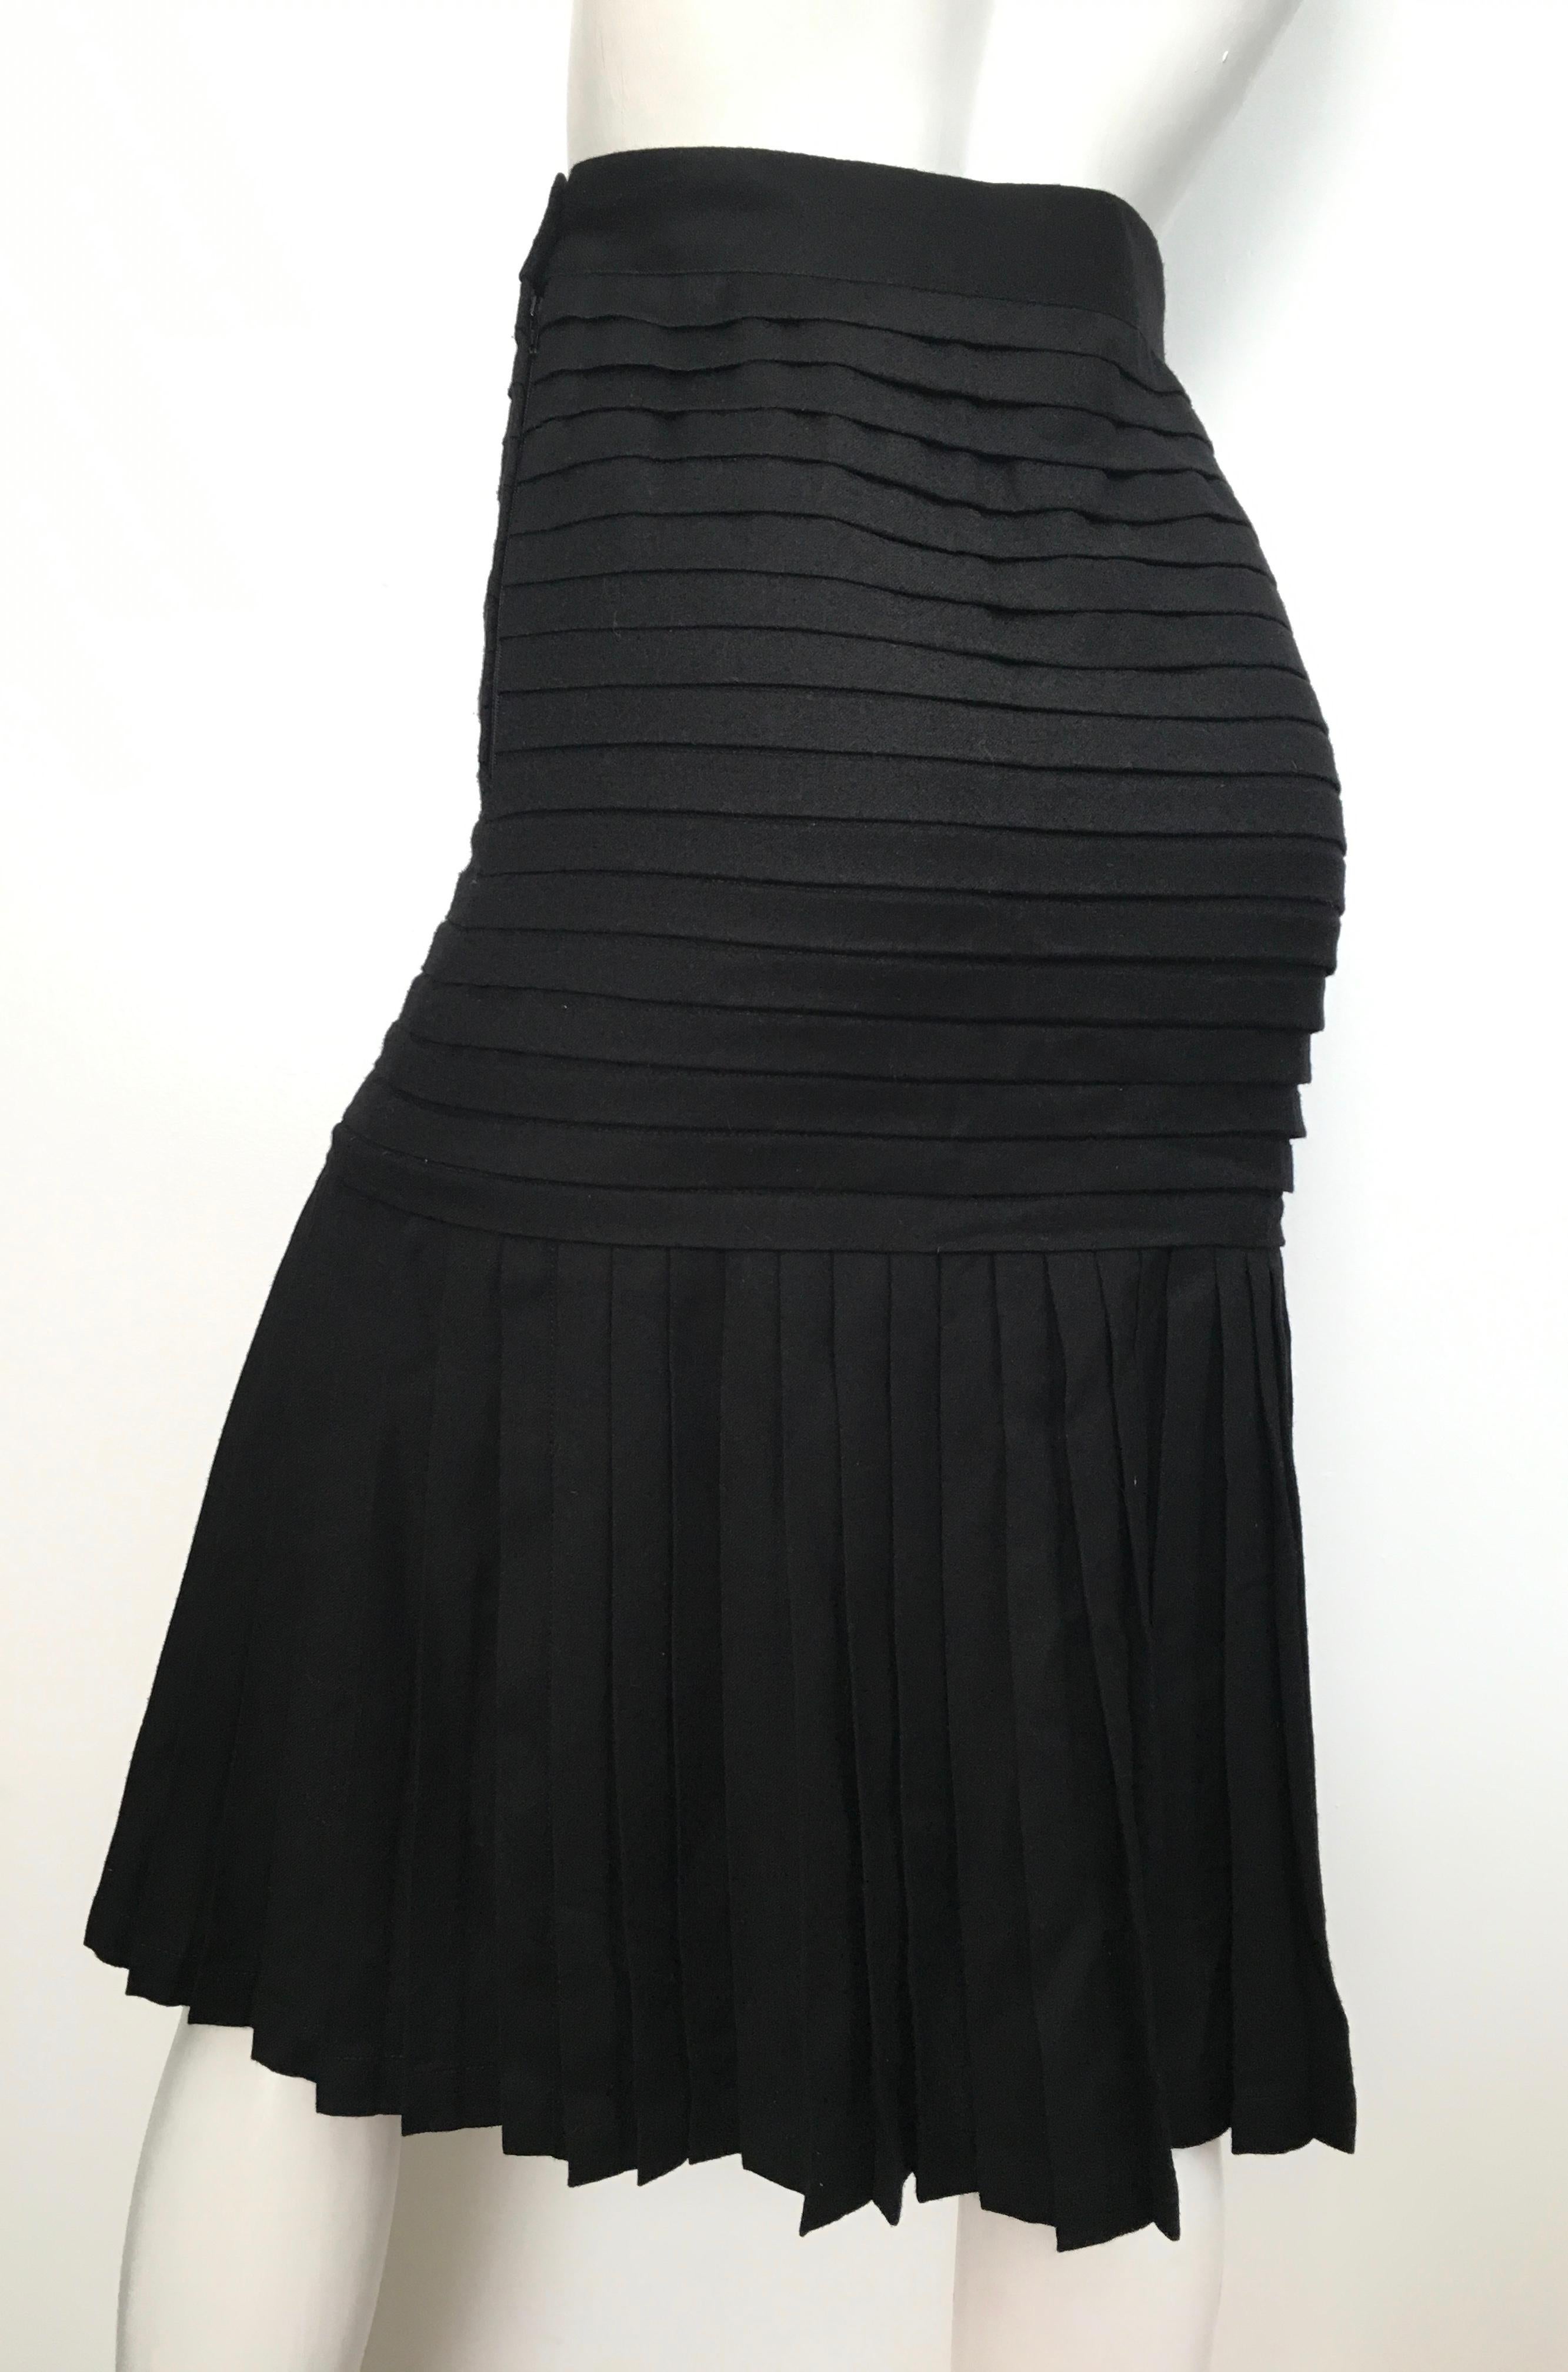 Genny Black Wool Pleated Skirt Size 6. For Sale 8